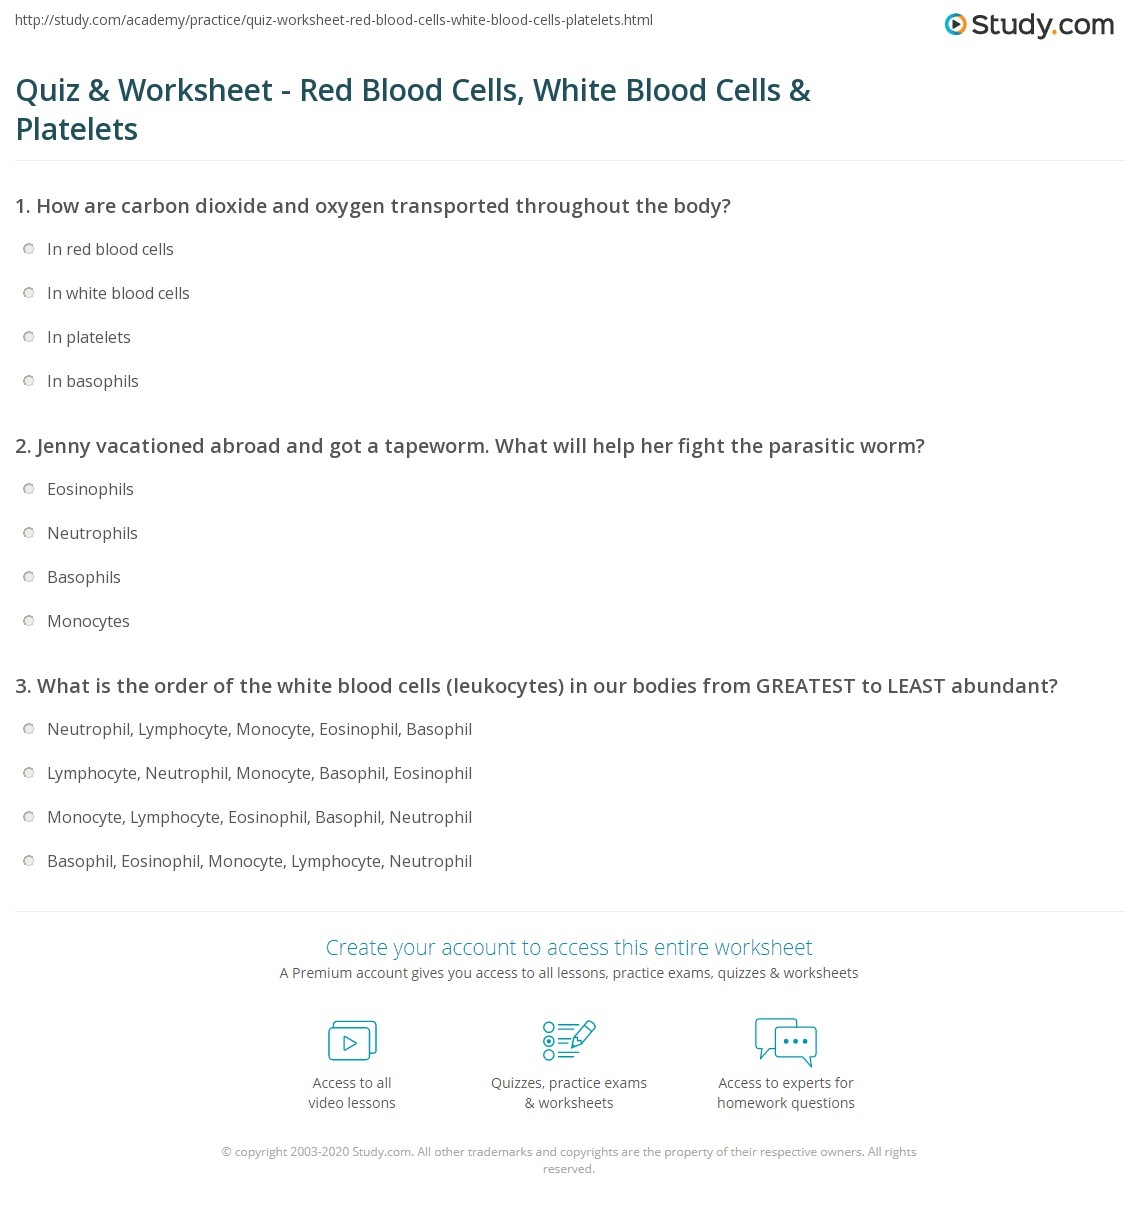 quiz-worksheet-red-blood-cells-white-blood-cells-platelets-study-math-worksheet-answers